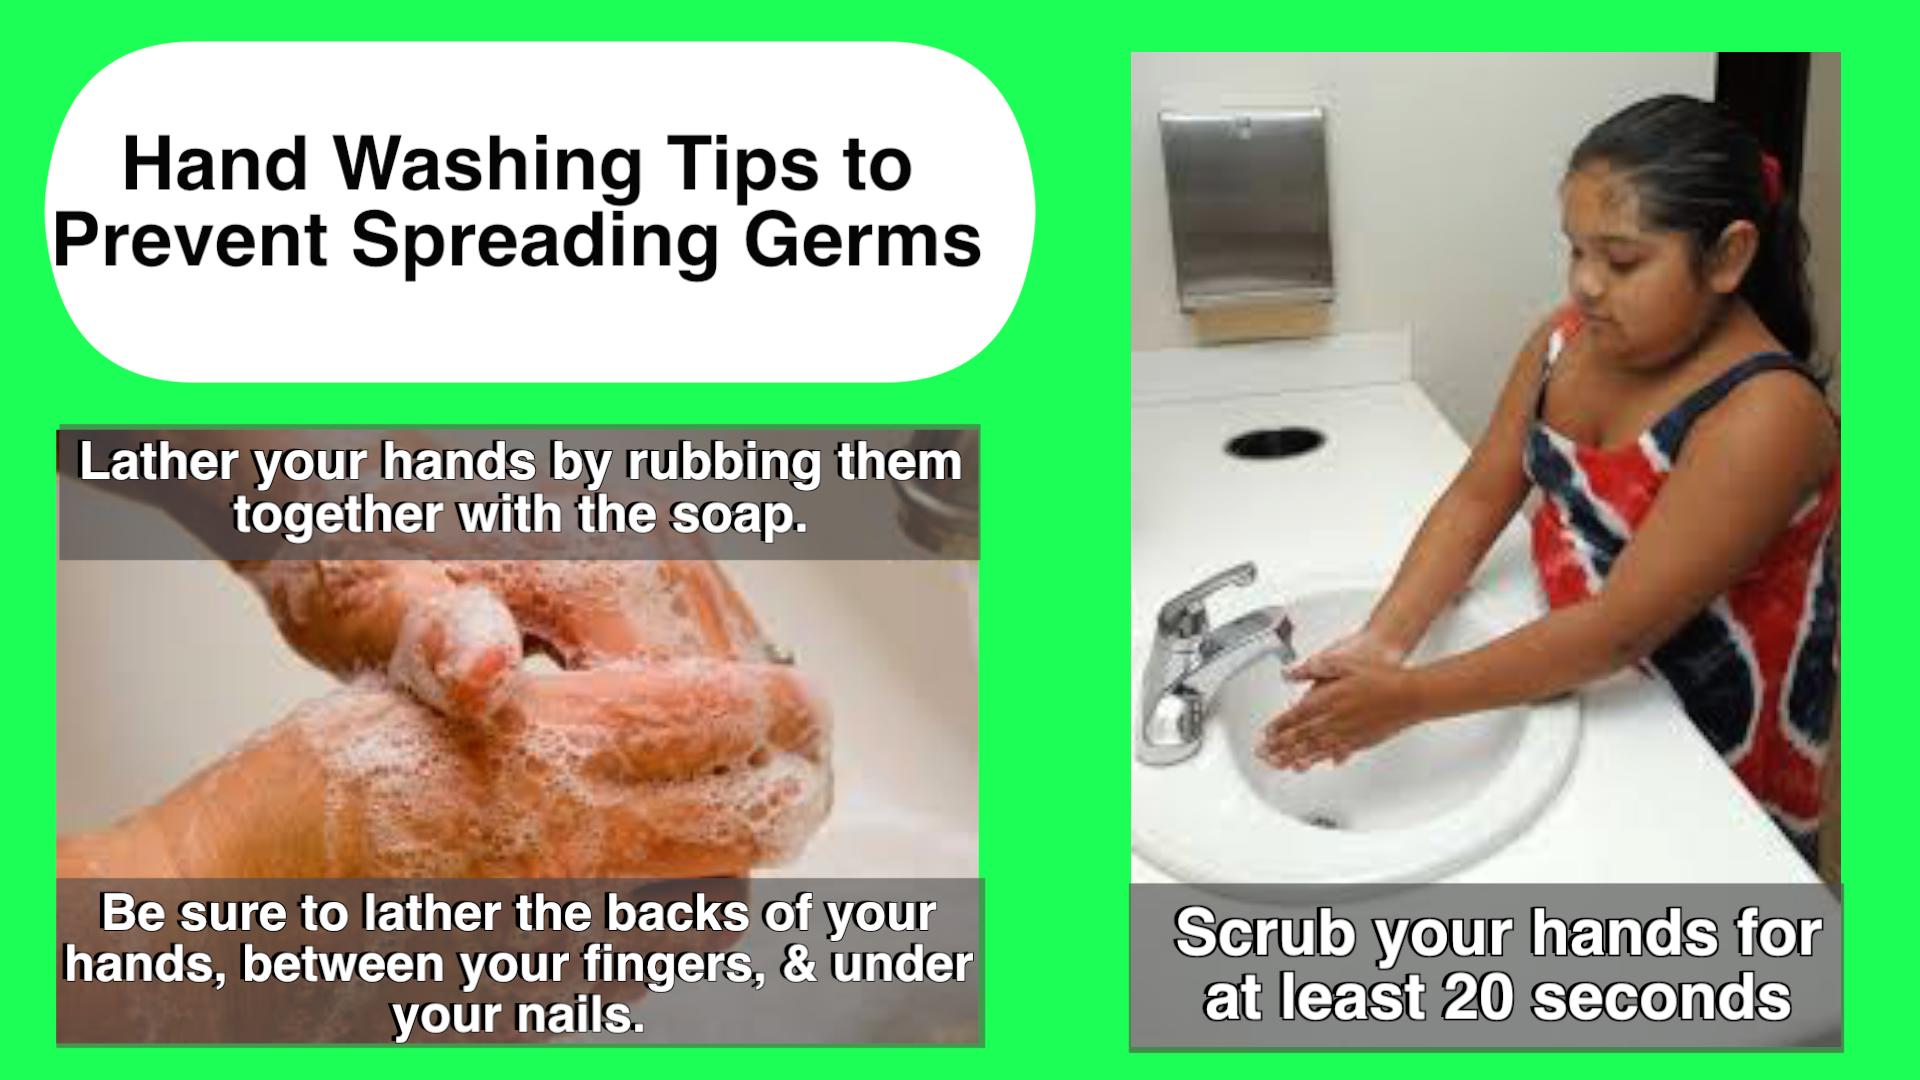 Handwashing Tips to prevent spreading germs. Lather your hands by rubbing them together with the soap. Be sure to lather the backs of your hands, between your fingers, & under your nails. Scrub your hands for at least 20 seconds.